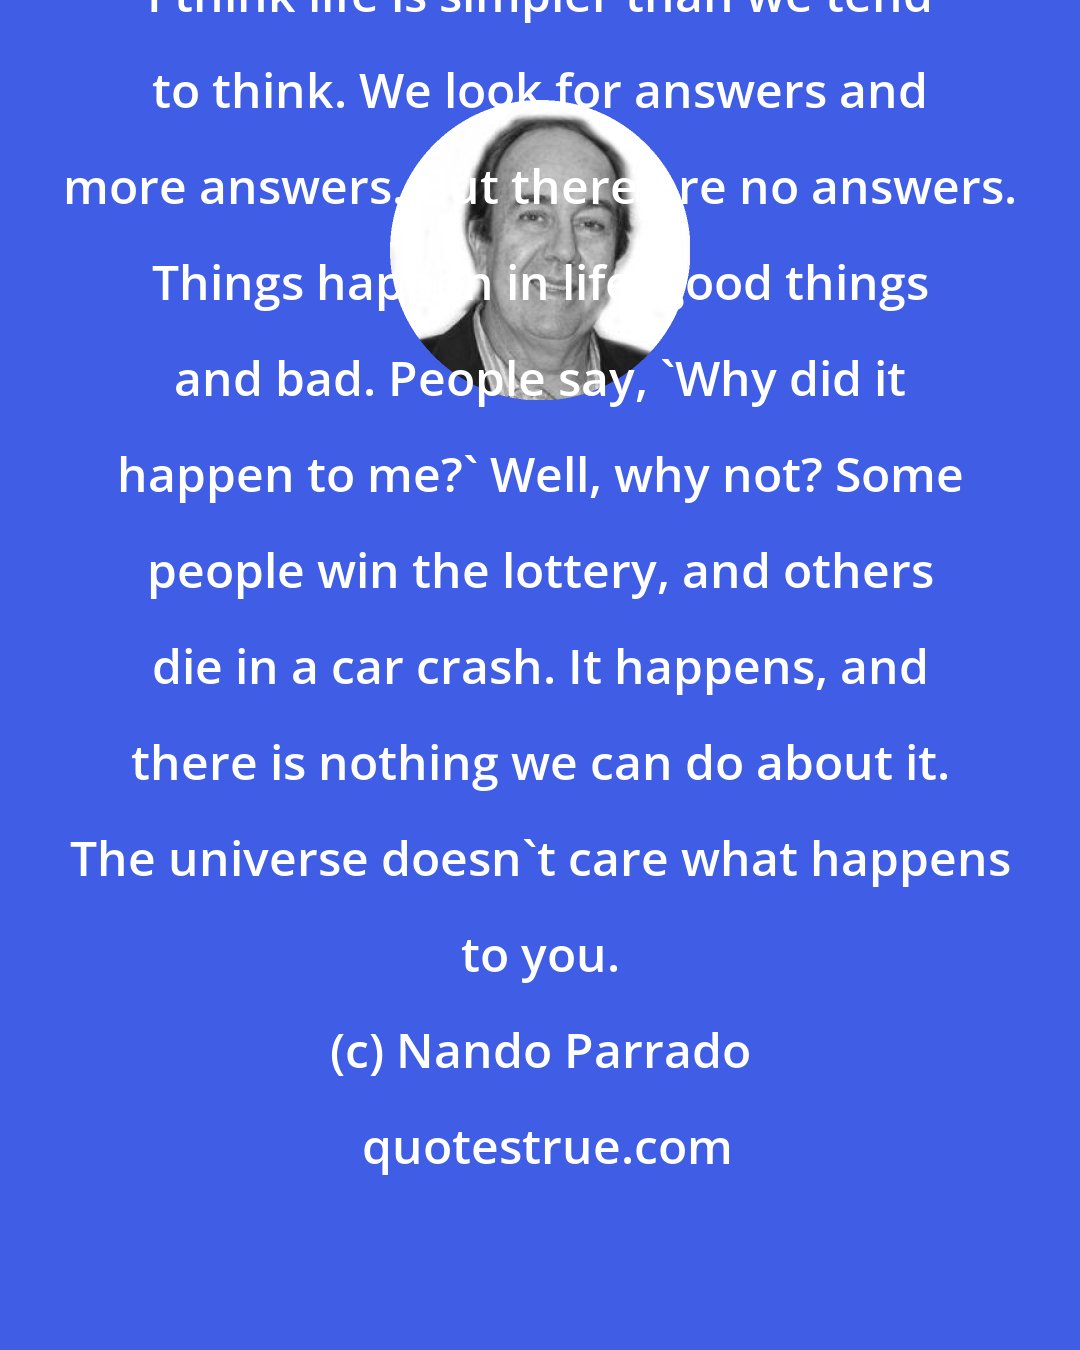 Nando Parrado: I think life is simpler than we tend to think. We look for answers and more answers. But there are no answers. Things happen in life, good things and bad. People say, 'Why did it happen to me?' Well, why not? Some people win the lottery, and others die in a car crash. It happens, and there is nothing we can do about it. The universe doesn't care what happens to you.